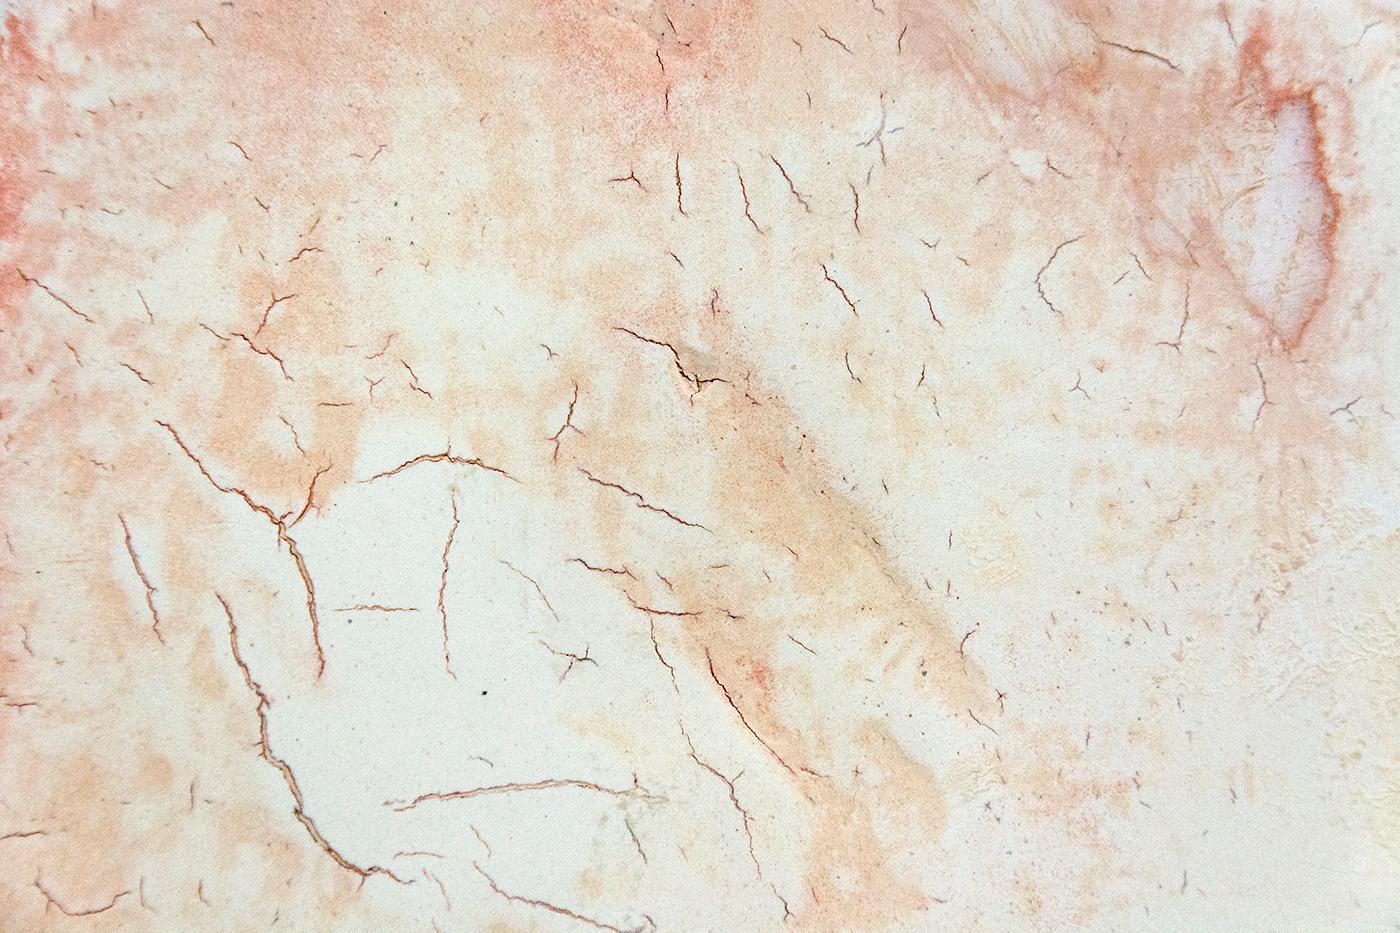 And island of burnished rose with flecks of crimson and gold floats on a ground of cloud white in this contemplative abstraction by Jutta Naim. The suggestive marks in the dynamic ground soaked in light grey brings to mind ancient, fossilized spines